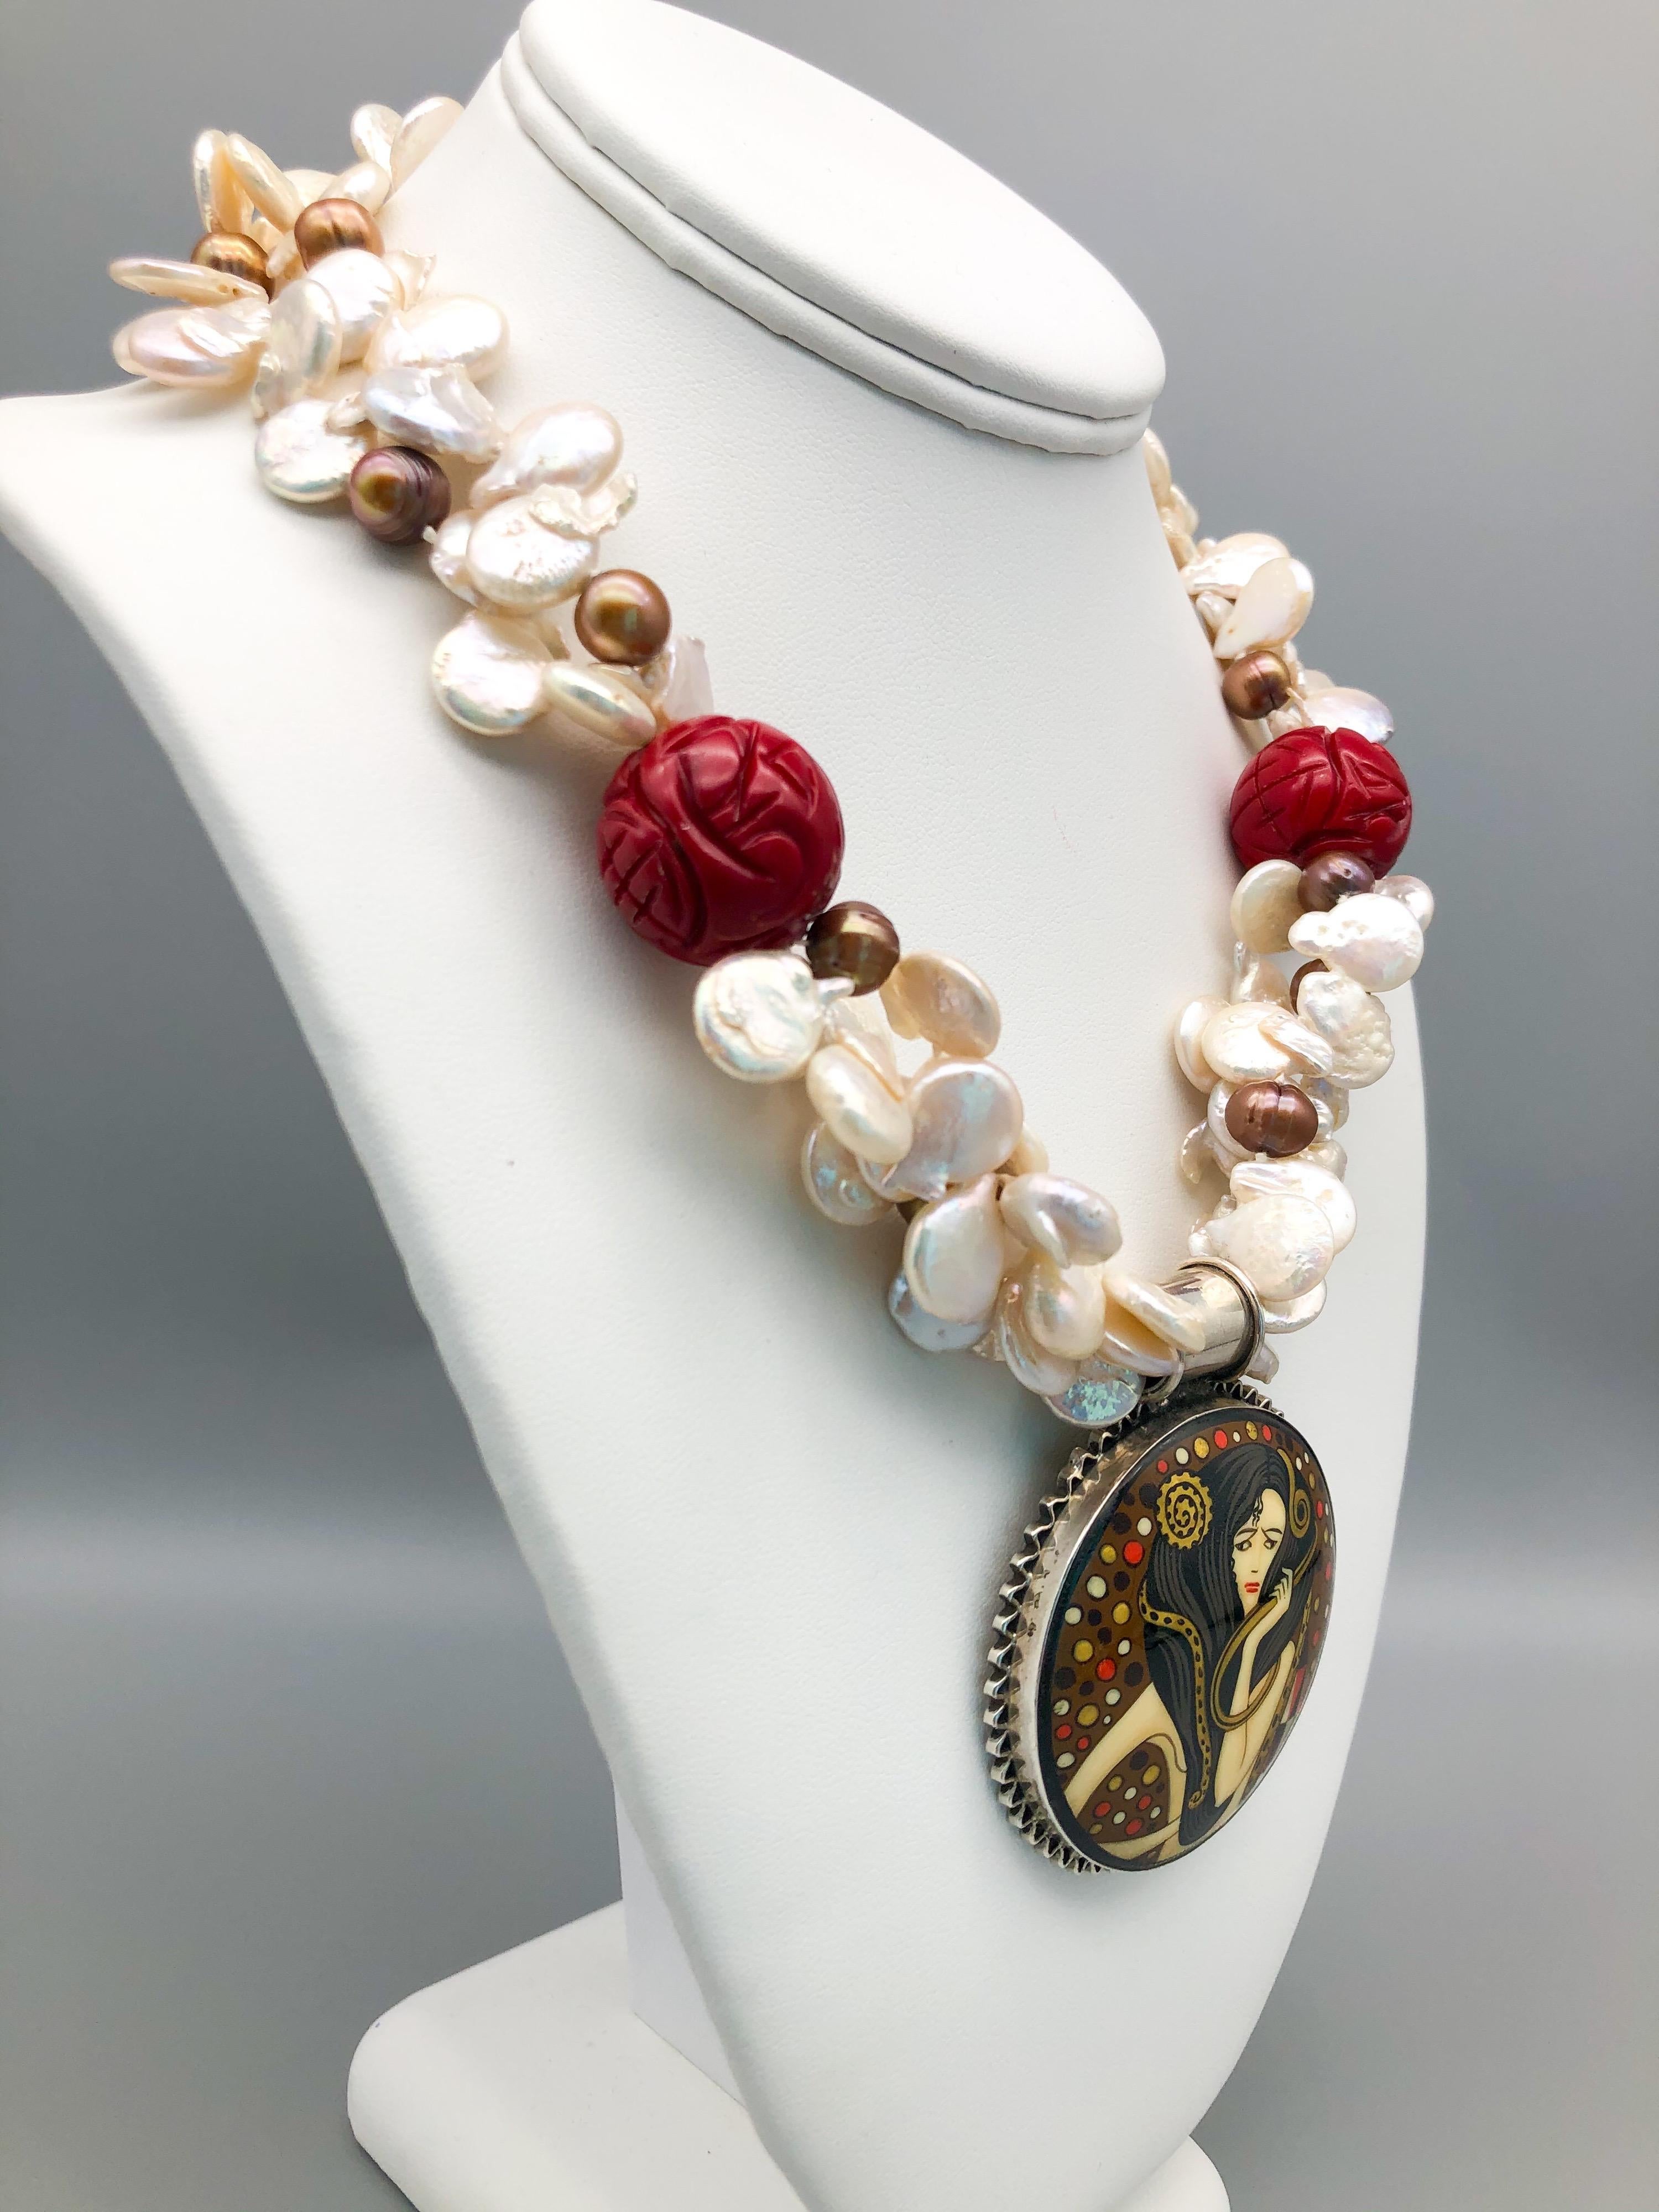 One-of-a-Kind
The pendant is hand-painted and signed on an onyx disc measuring a 2” circumference set in sterling silver. It hangs from a double strand of baroque pearls, punctuated by a pair of carved Chinese red double happiness beads. The clasp